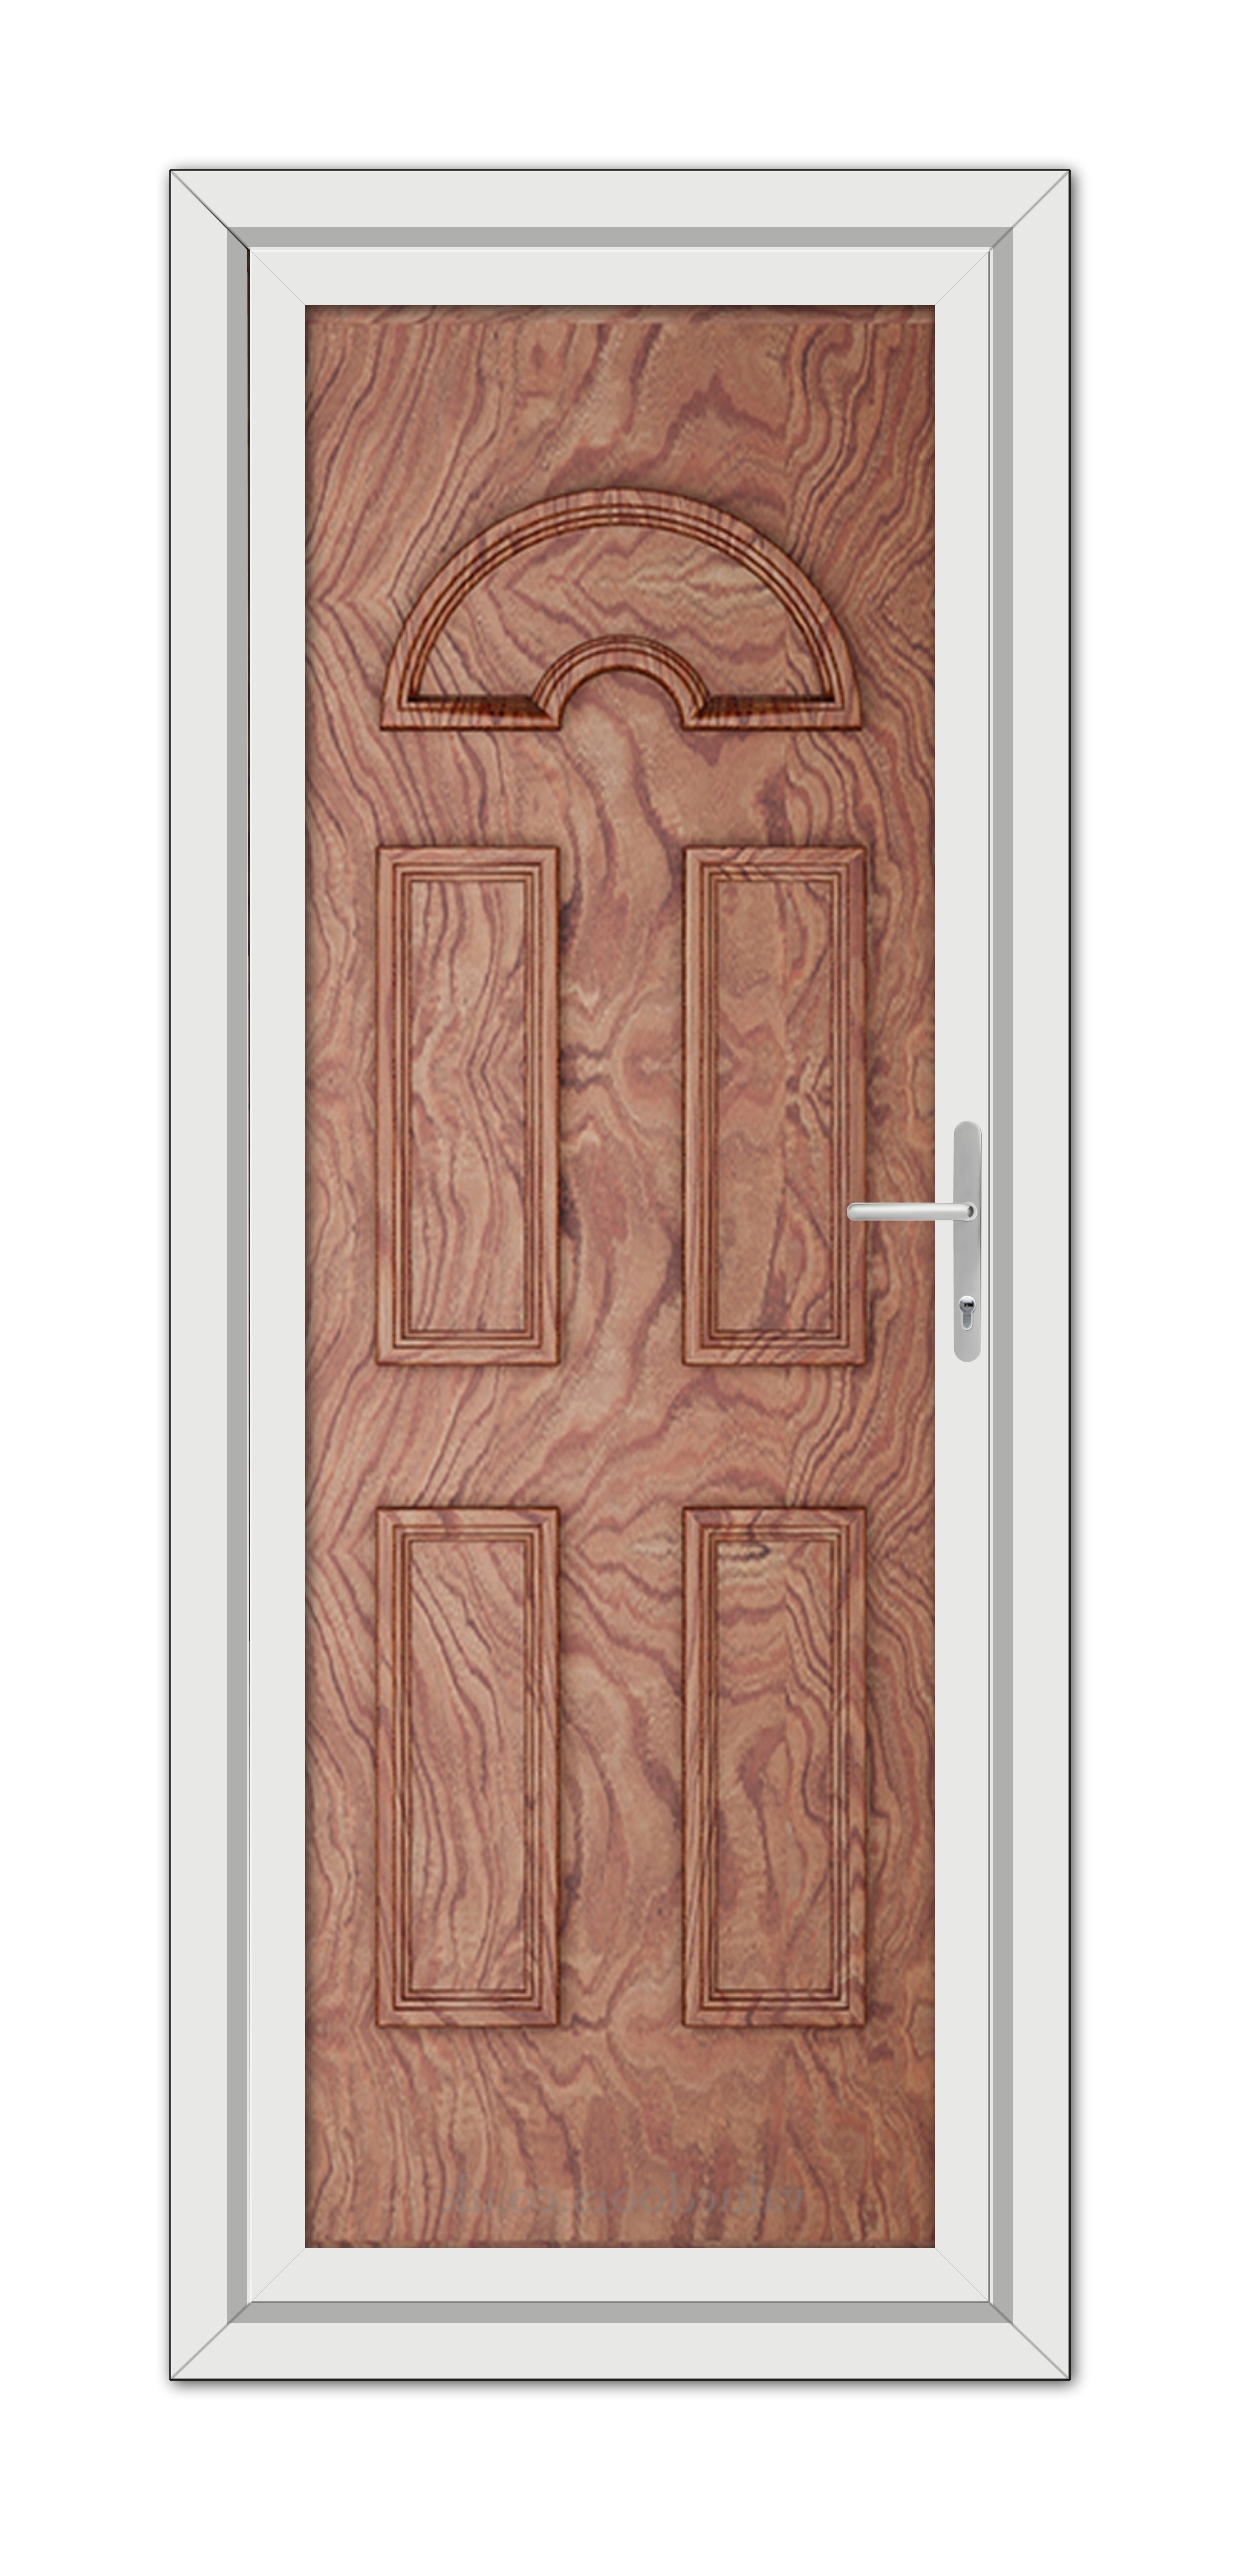 A Solid Oak Sandringham Solid uPVC Door with an arched top panel and three vertical panels, set in a white frame with a simple handle on the right side.